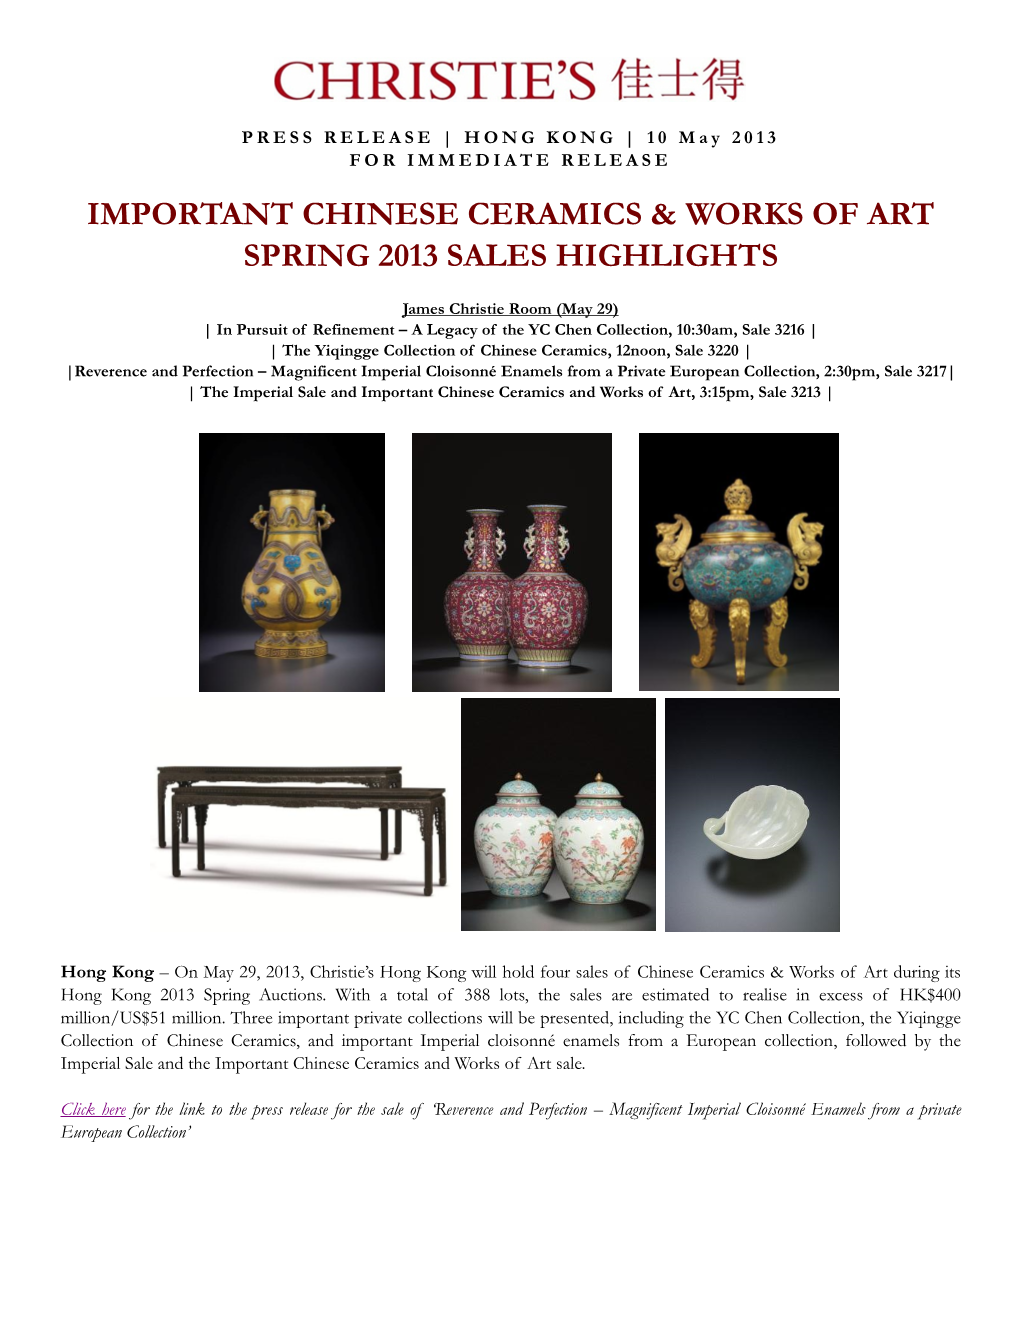 Important Chinese Ceramics & Works of Art Spring 2013